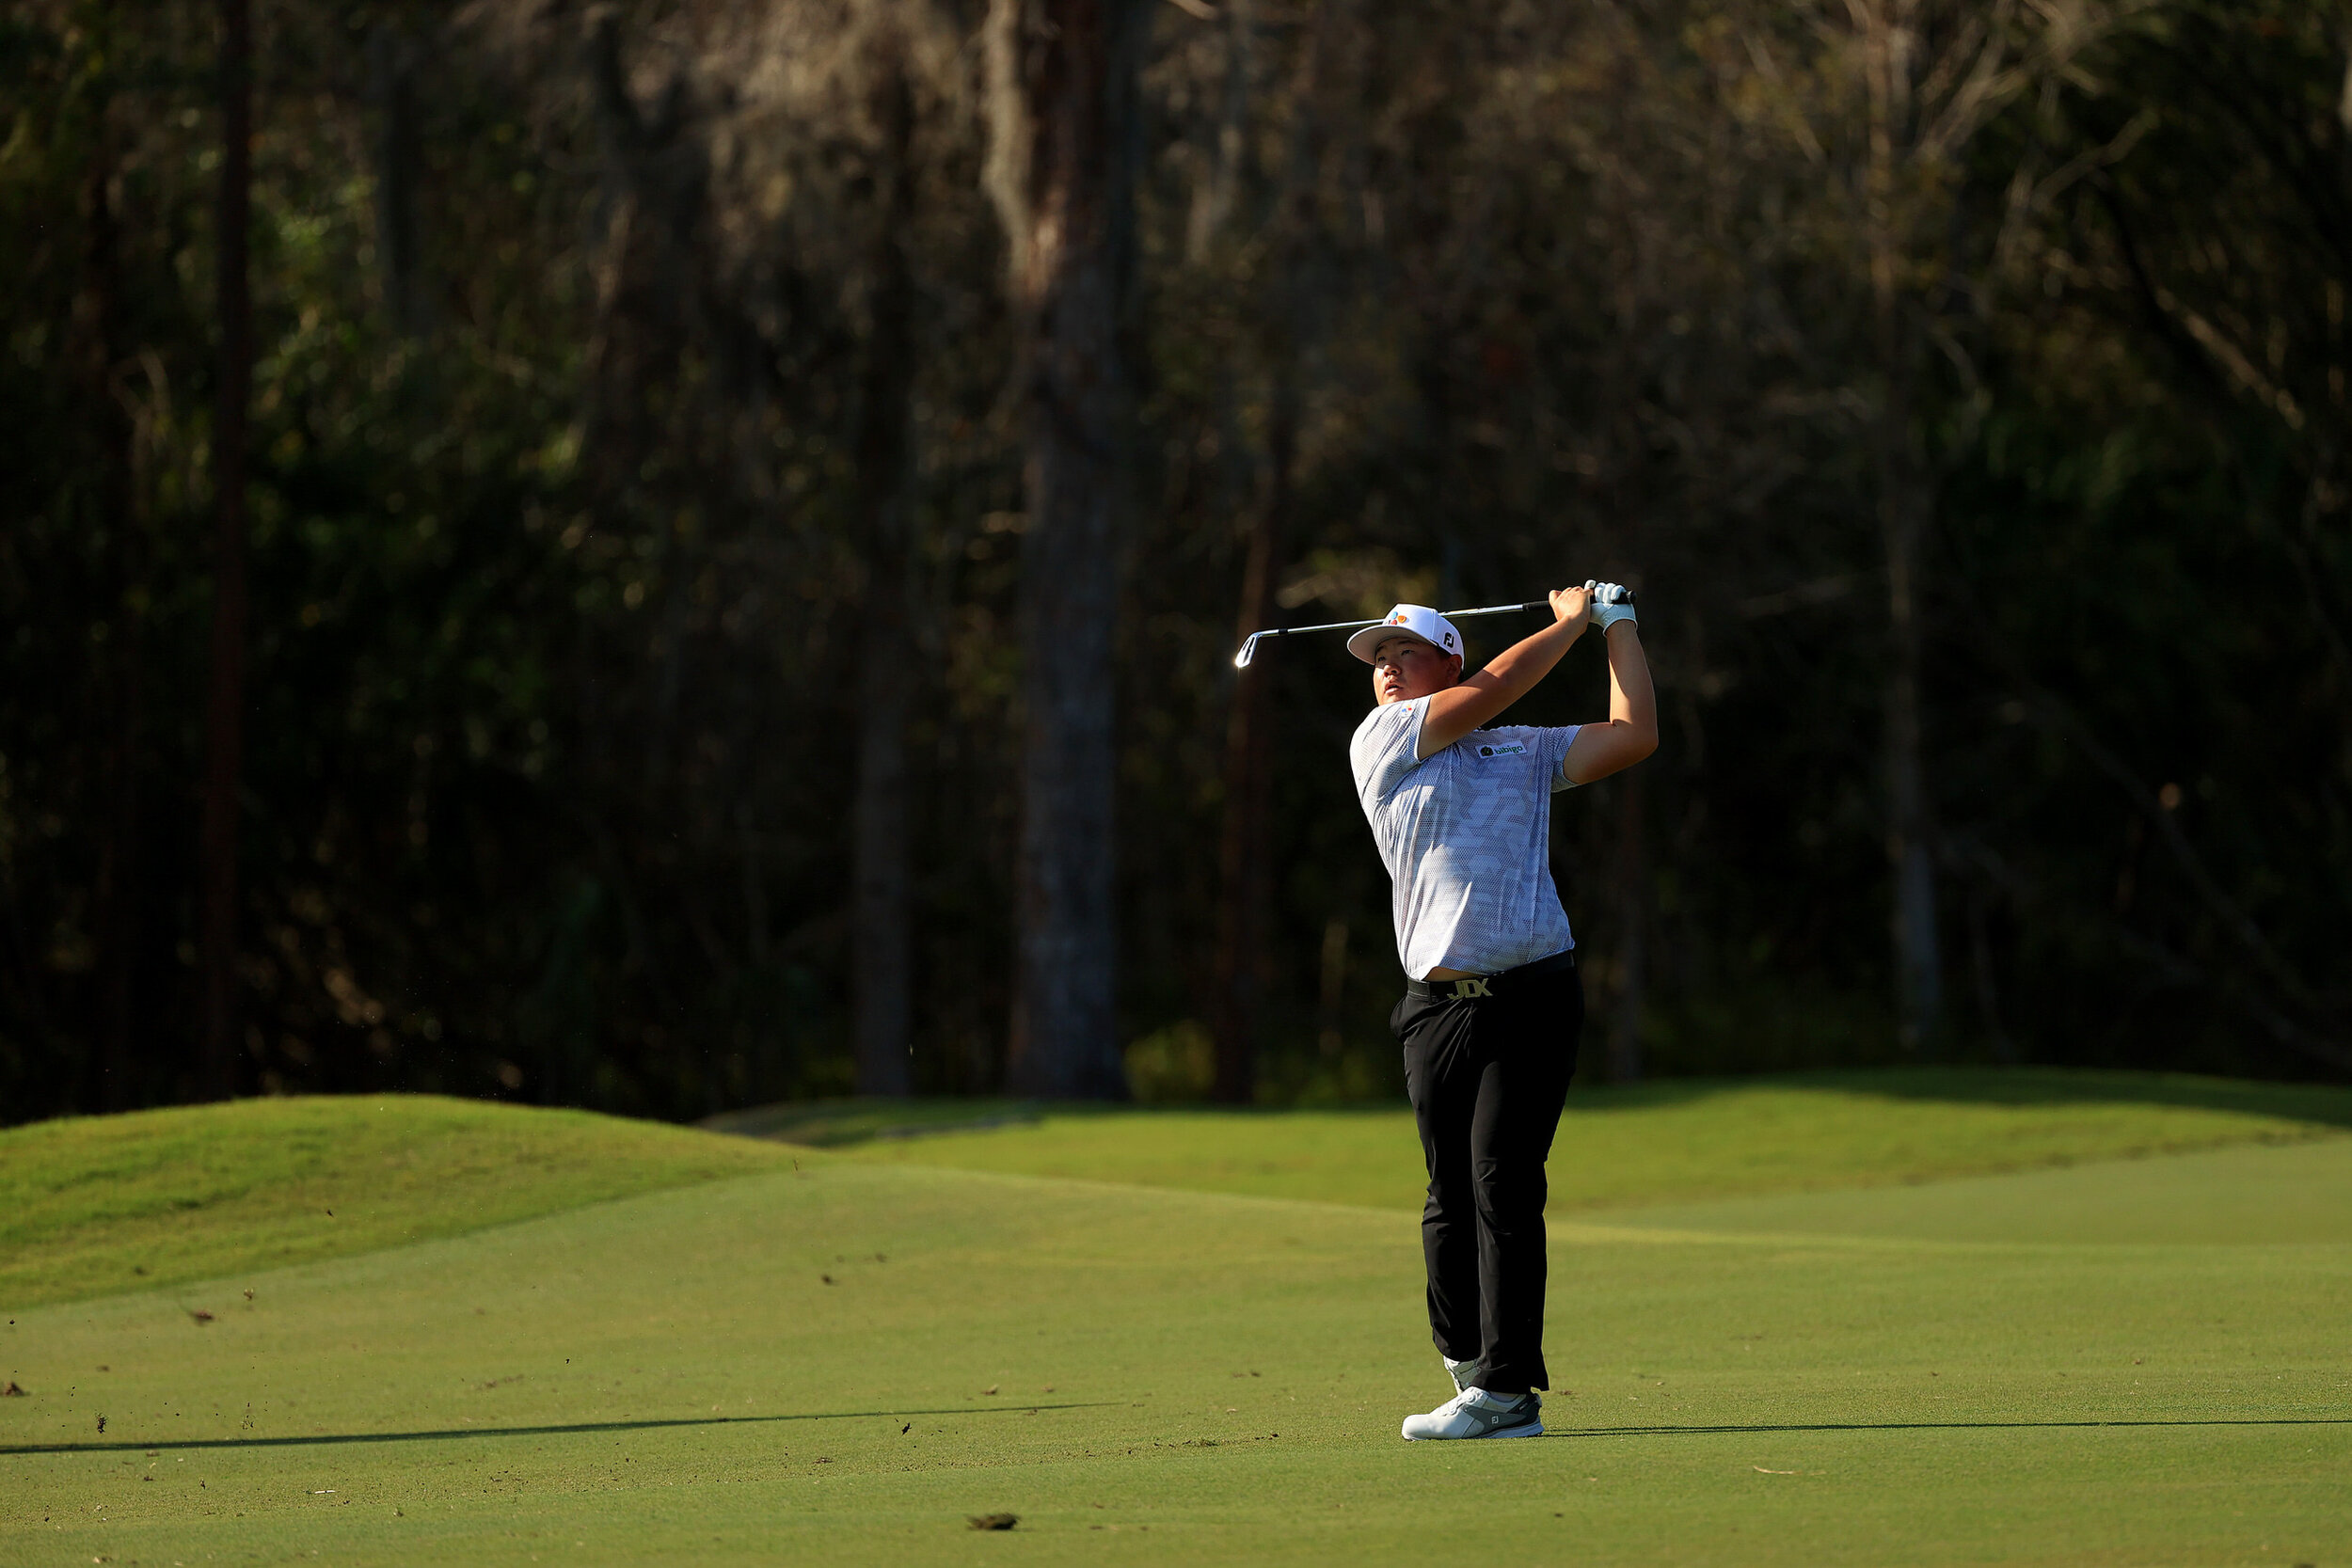  BRADENTON, FLORIDA - FEBRUARY 25: Sungjae Im of Korea plays an approach shot on the 18th hole during the first round of World Golf Championships-Workday Championship at The Concession on February 25, 2021 in Bradenton, Florida. (Photo by Mike Ehrman